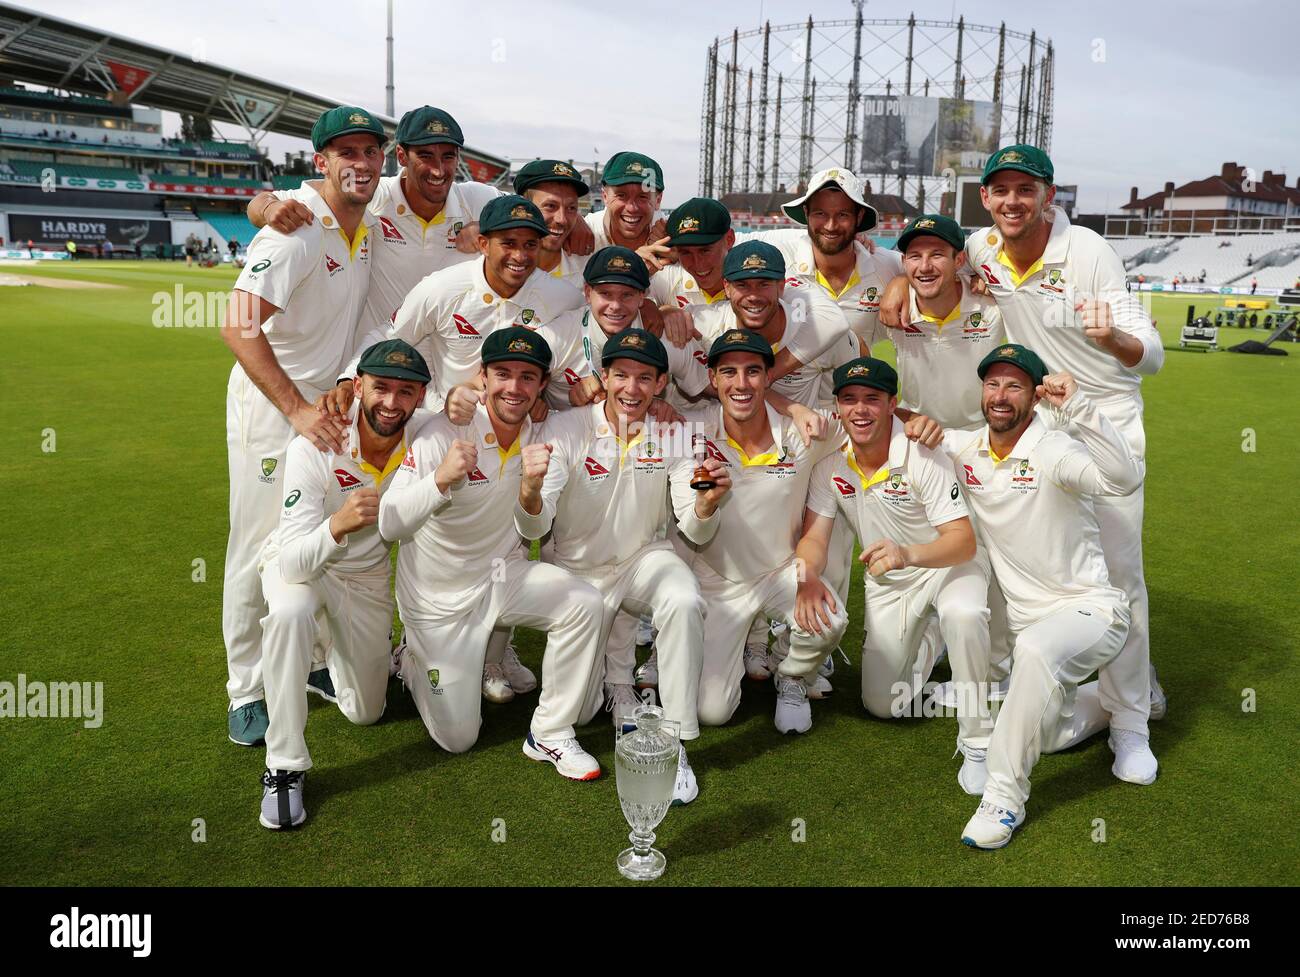 Cricket - Ashes 2019 - Fifth Test - England v Australia - Kia Oval, London, Britain - September 15, 2019  Australia players celebrate with the Ashes trophy and urn after drawing the series to retain the Ashes  Action Images via Reuters/Paul Childs Stock Photo